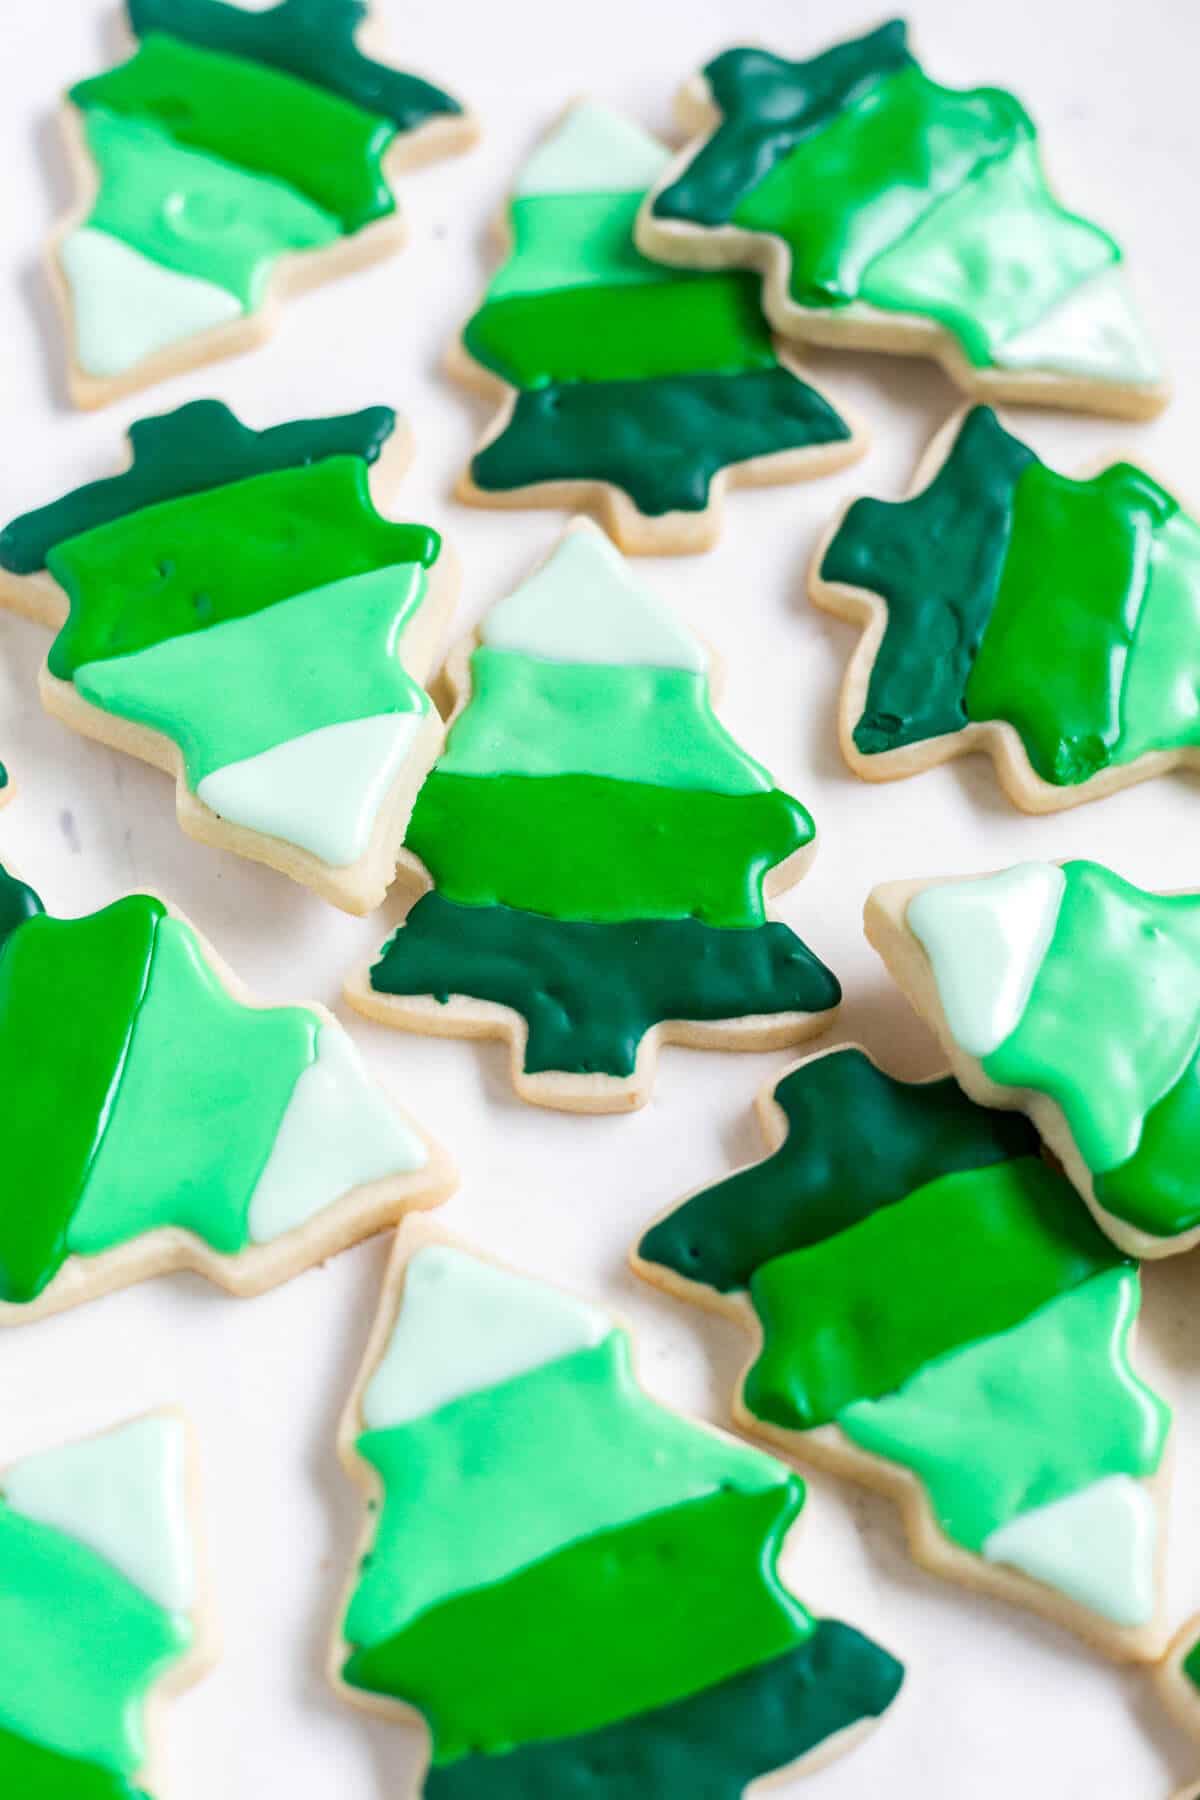 These Christmas tree cookies are decorated with 4 colors of royal icing to create an ombre effect! With different shades of green you’ll get a fun, festive and impressive cookie to add to the list of Christmas cookies.